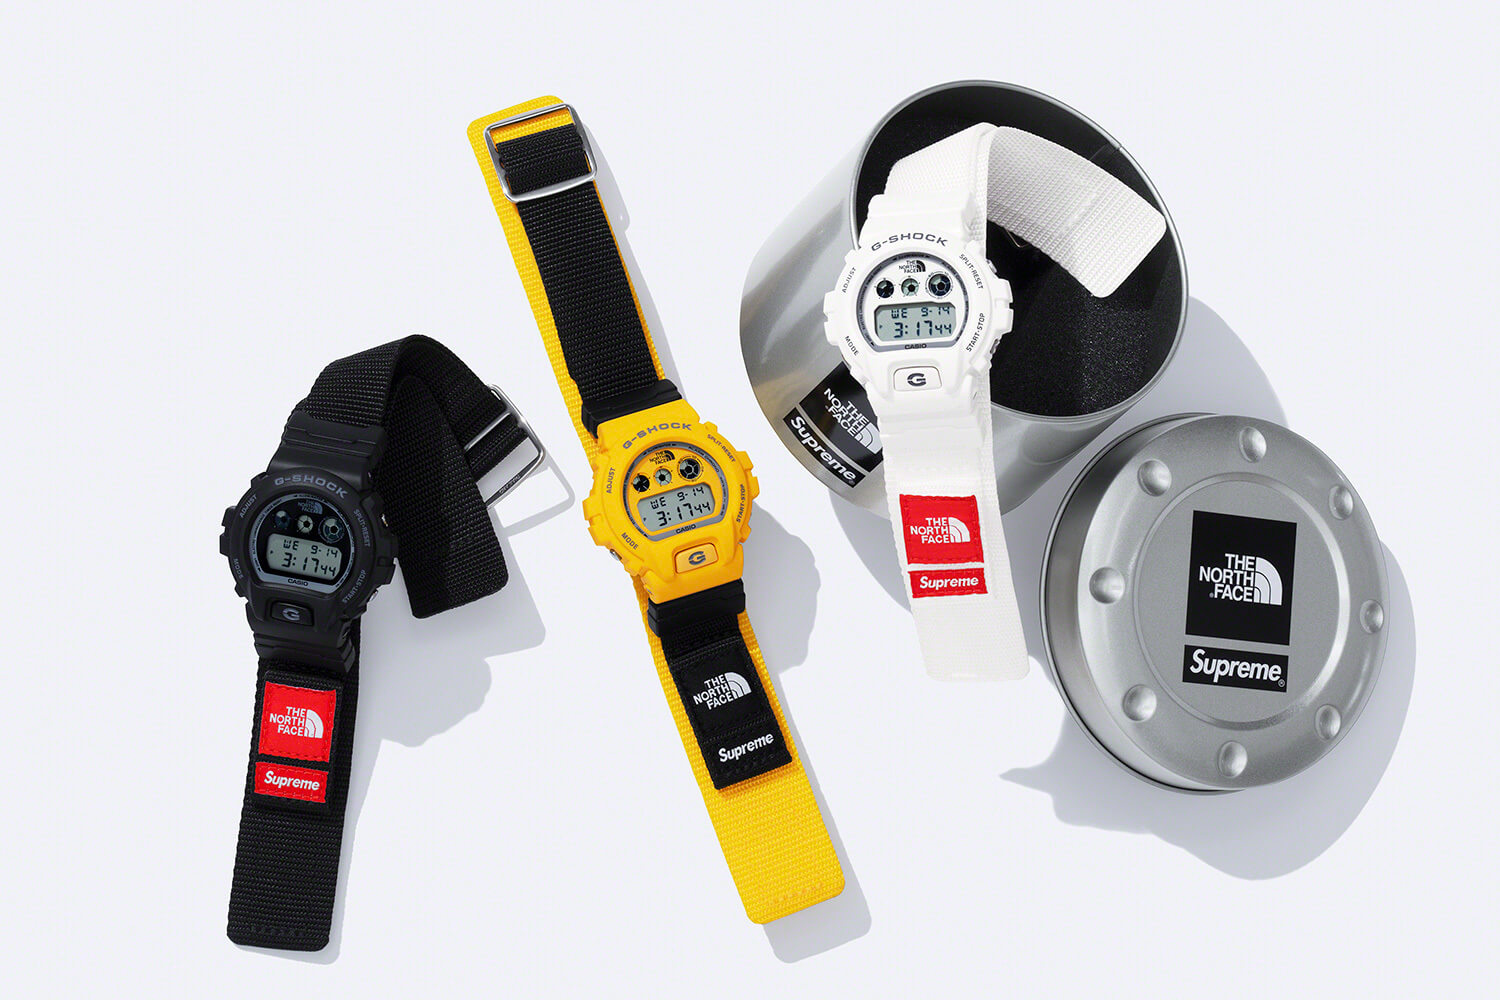 The Supreme x The North Face x G-Shock DW-6900 collaboration is launching  November 25 - G-Central G-Shock Fan Site